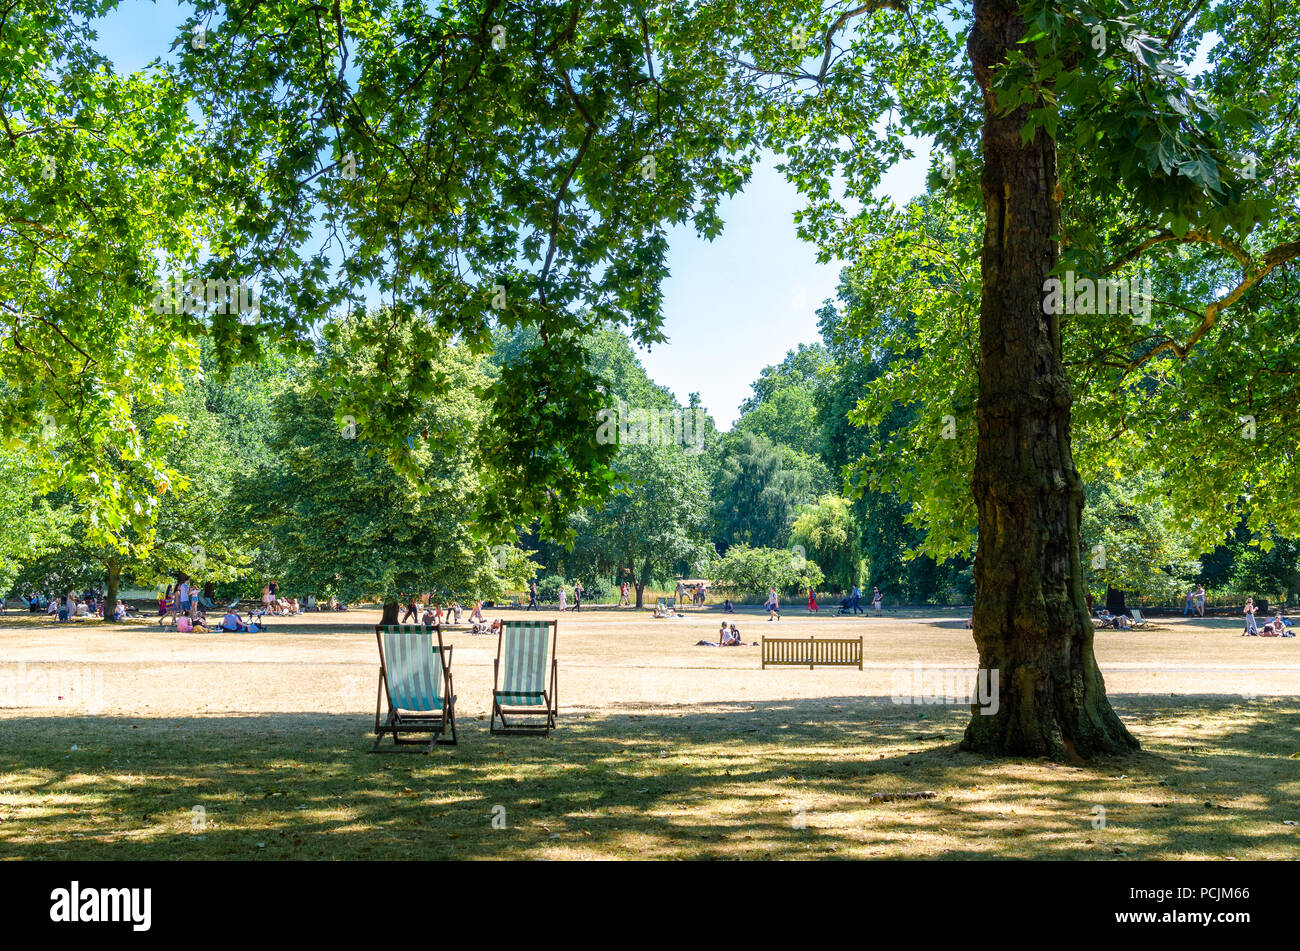 Deck chairs at St James' Park during the heatwave of summer 2018 Stock Photo